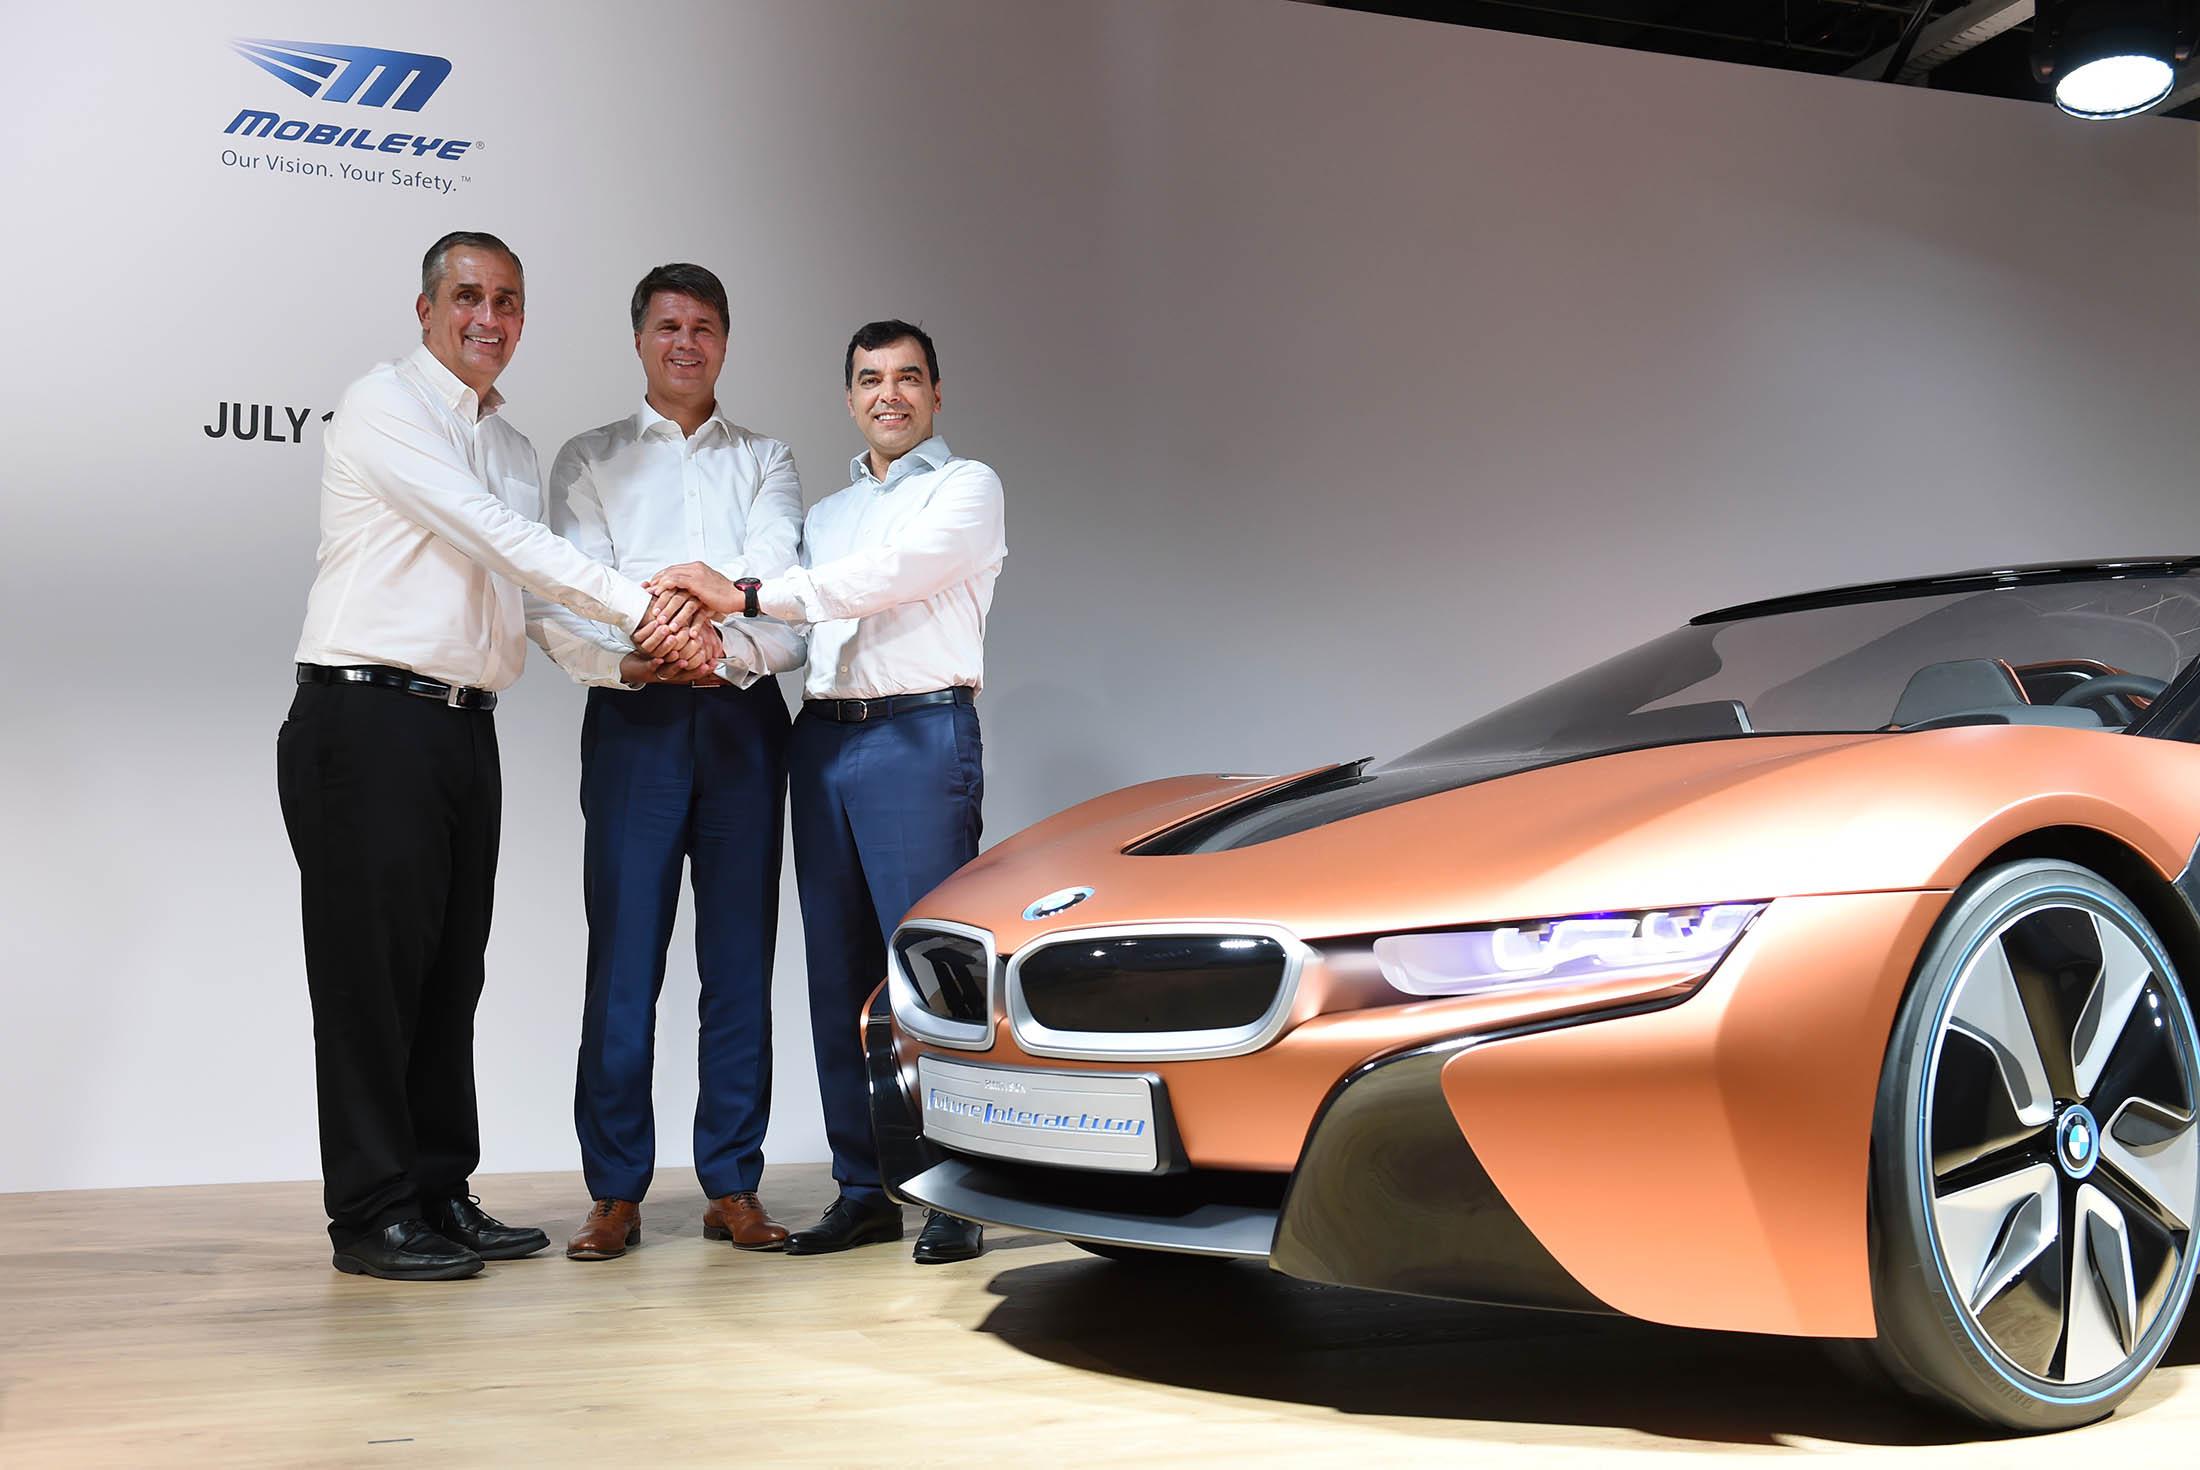 From left, Intel CEO Brian Krzanich, BMW CEO Harald Krueger, and co-founder of Mobileye Amnon Shashua in Munich on July 1. Demand in China for the company’s advanced driver assistance systems, or ADAS, will probably rise about 100-fold three years after the rules are in place.
